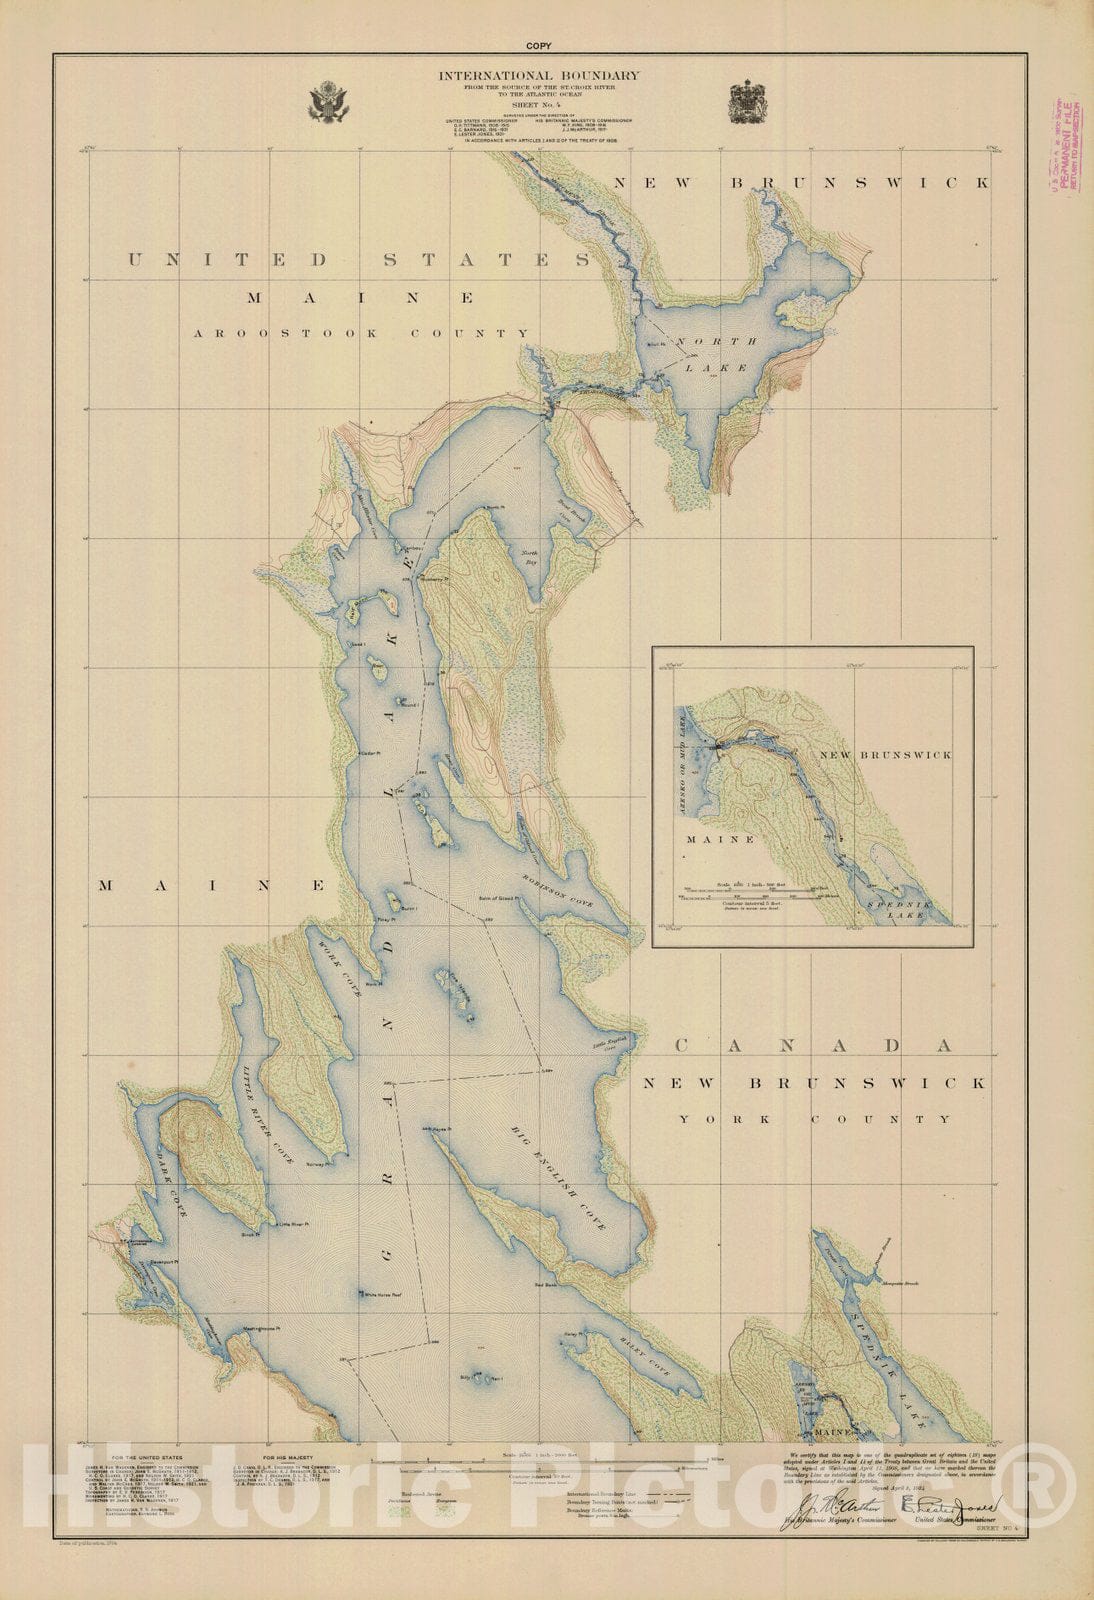 Historic Nautical Map - International Boundary, From The Source Of The St. Croix River To The Atlantic Ocean, Sheet No. 4, ME, 1924 NOAA Topographic - Vintage Wall Art